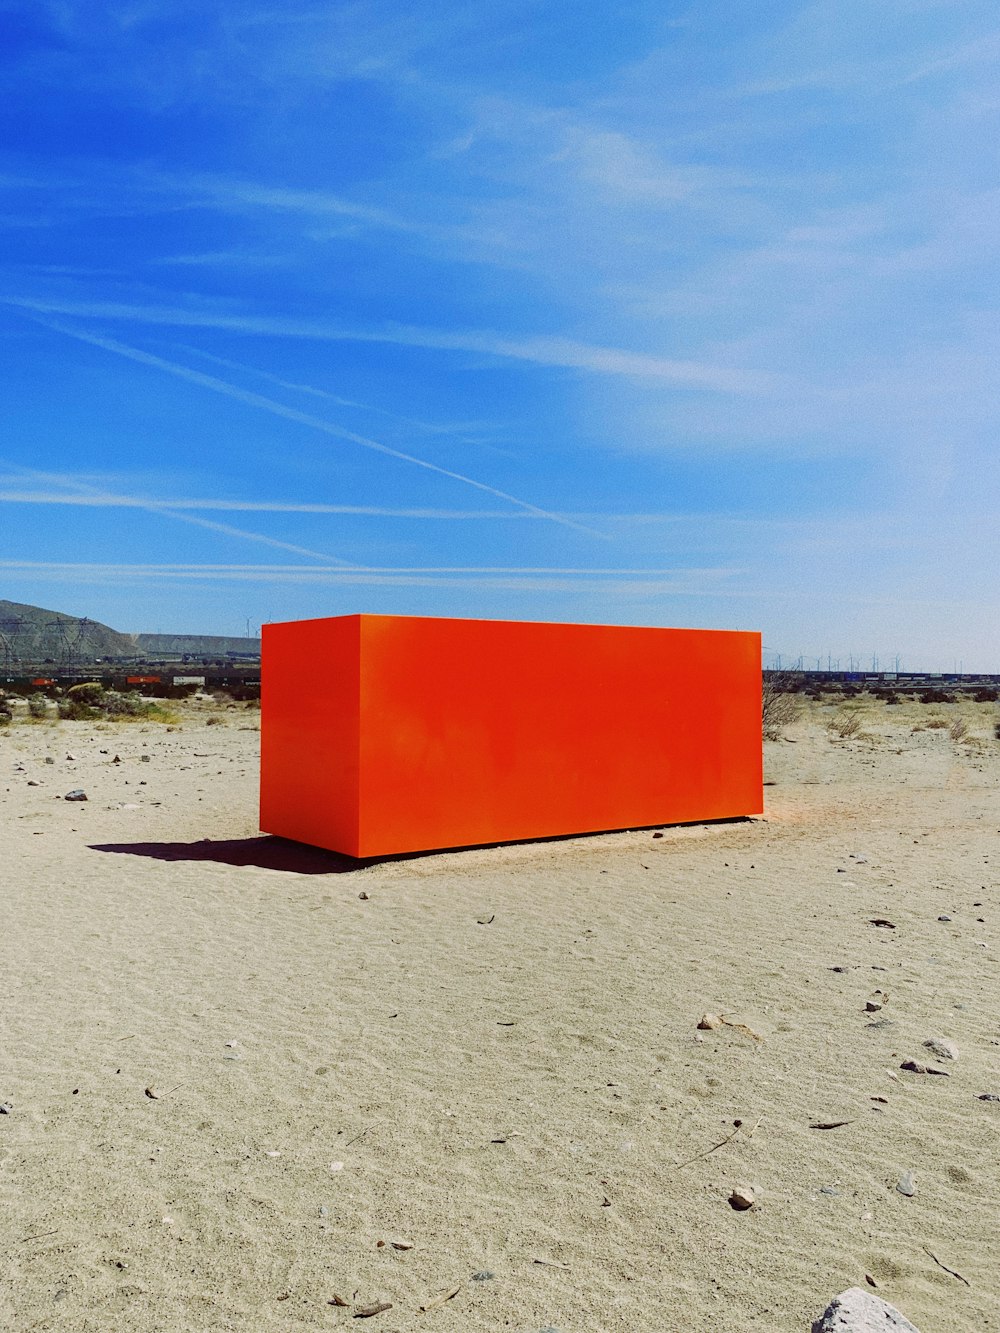 rectangular red container on sand outdoors during daytime